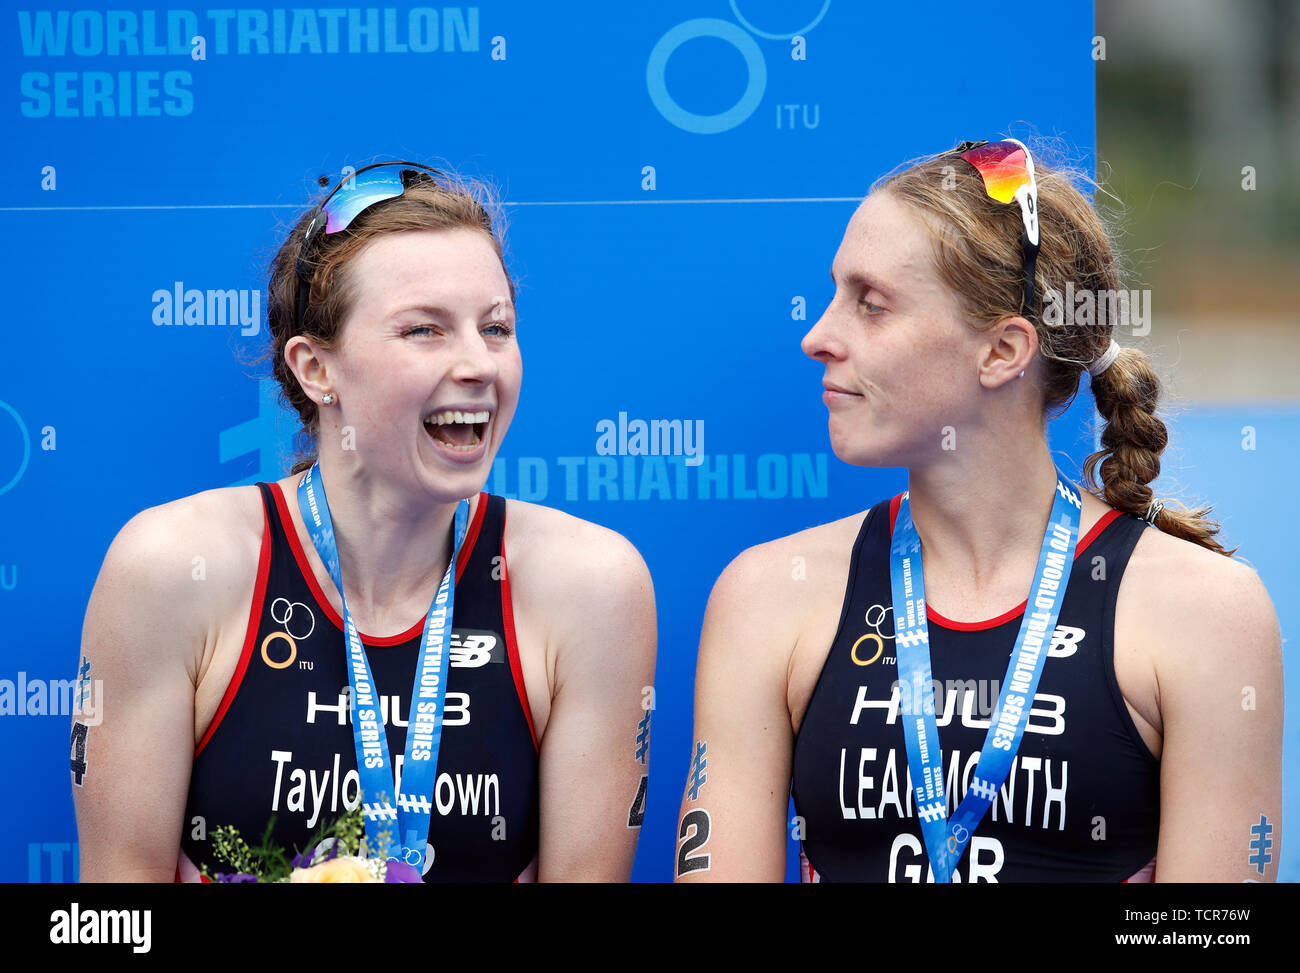 Winner Georgia Taylor-Brown (left) with Jessica Learmonth in third after the Elite Women's race during the 2019 ITU World Triathlon Series Event in Leeds. Stock Photo